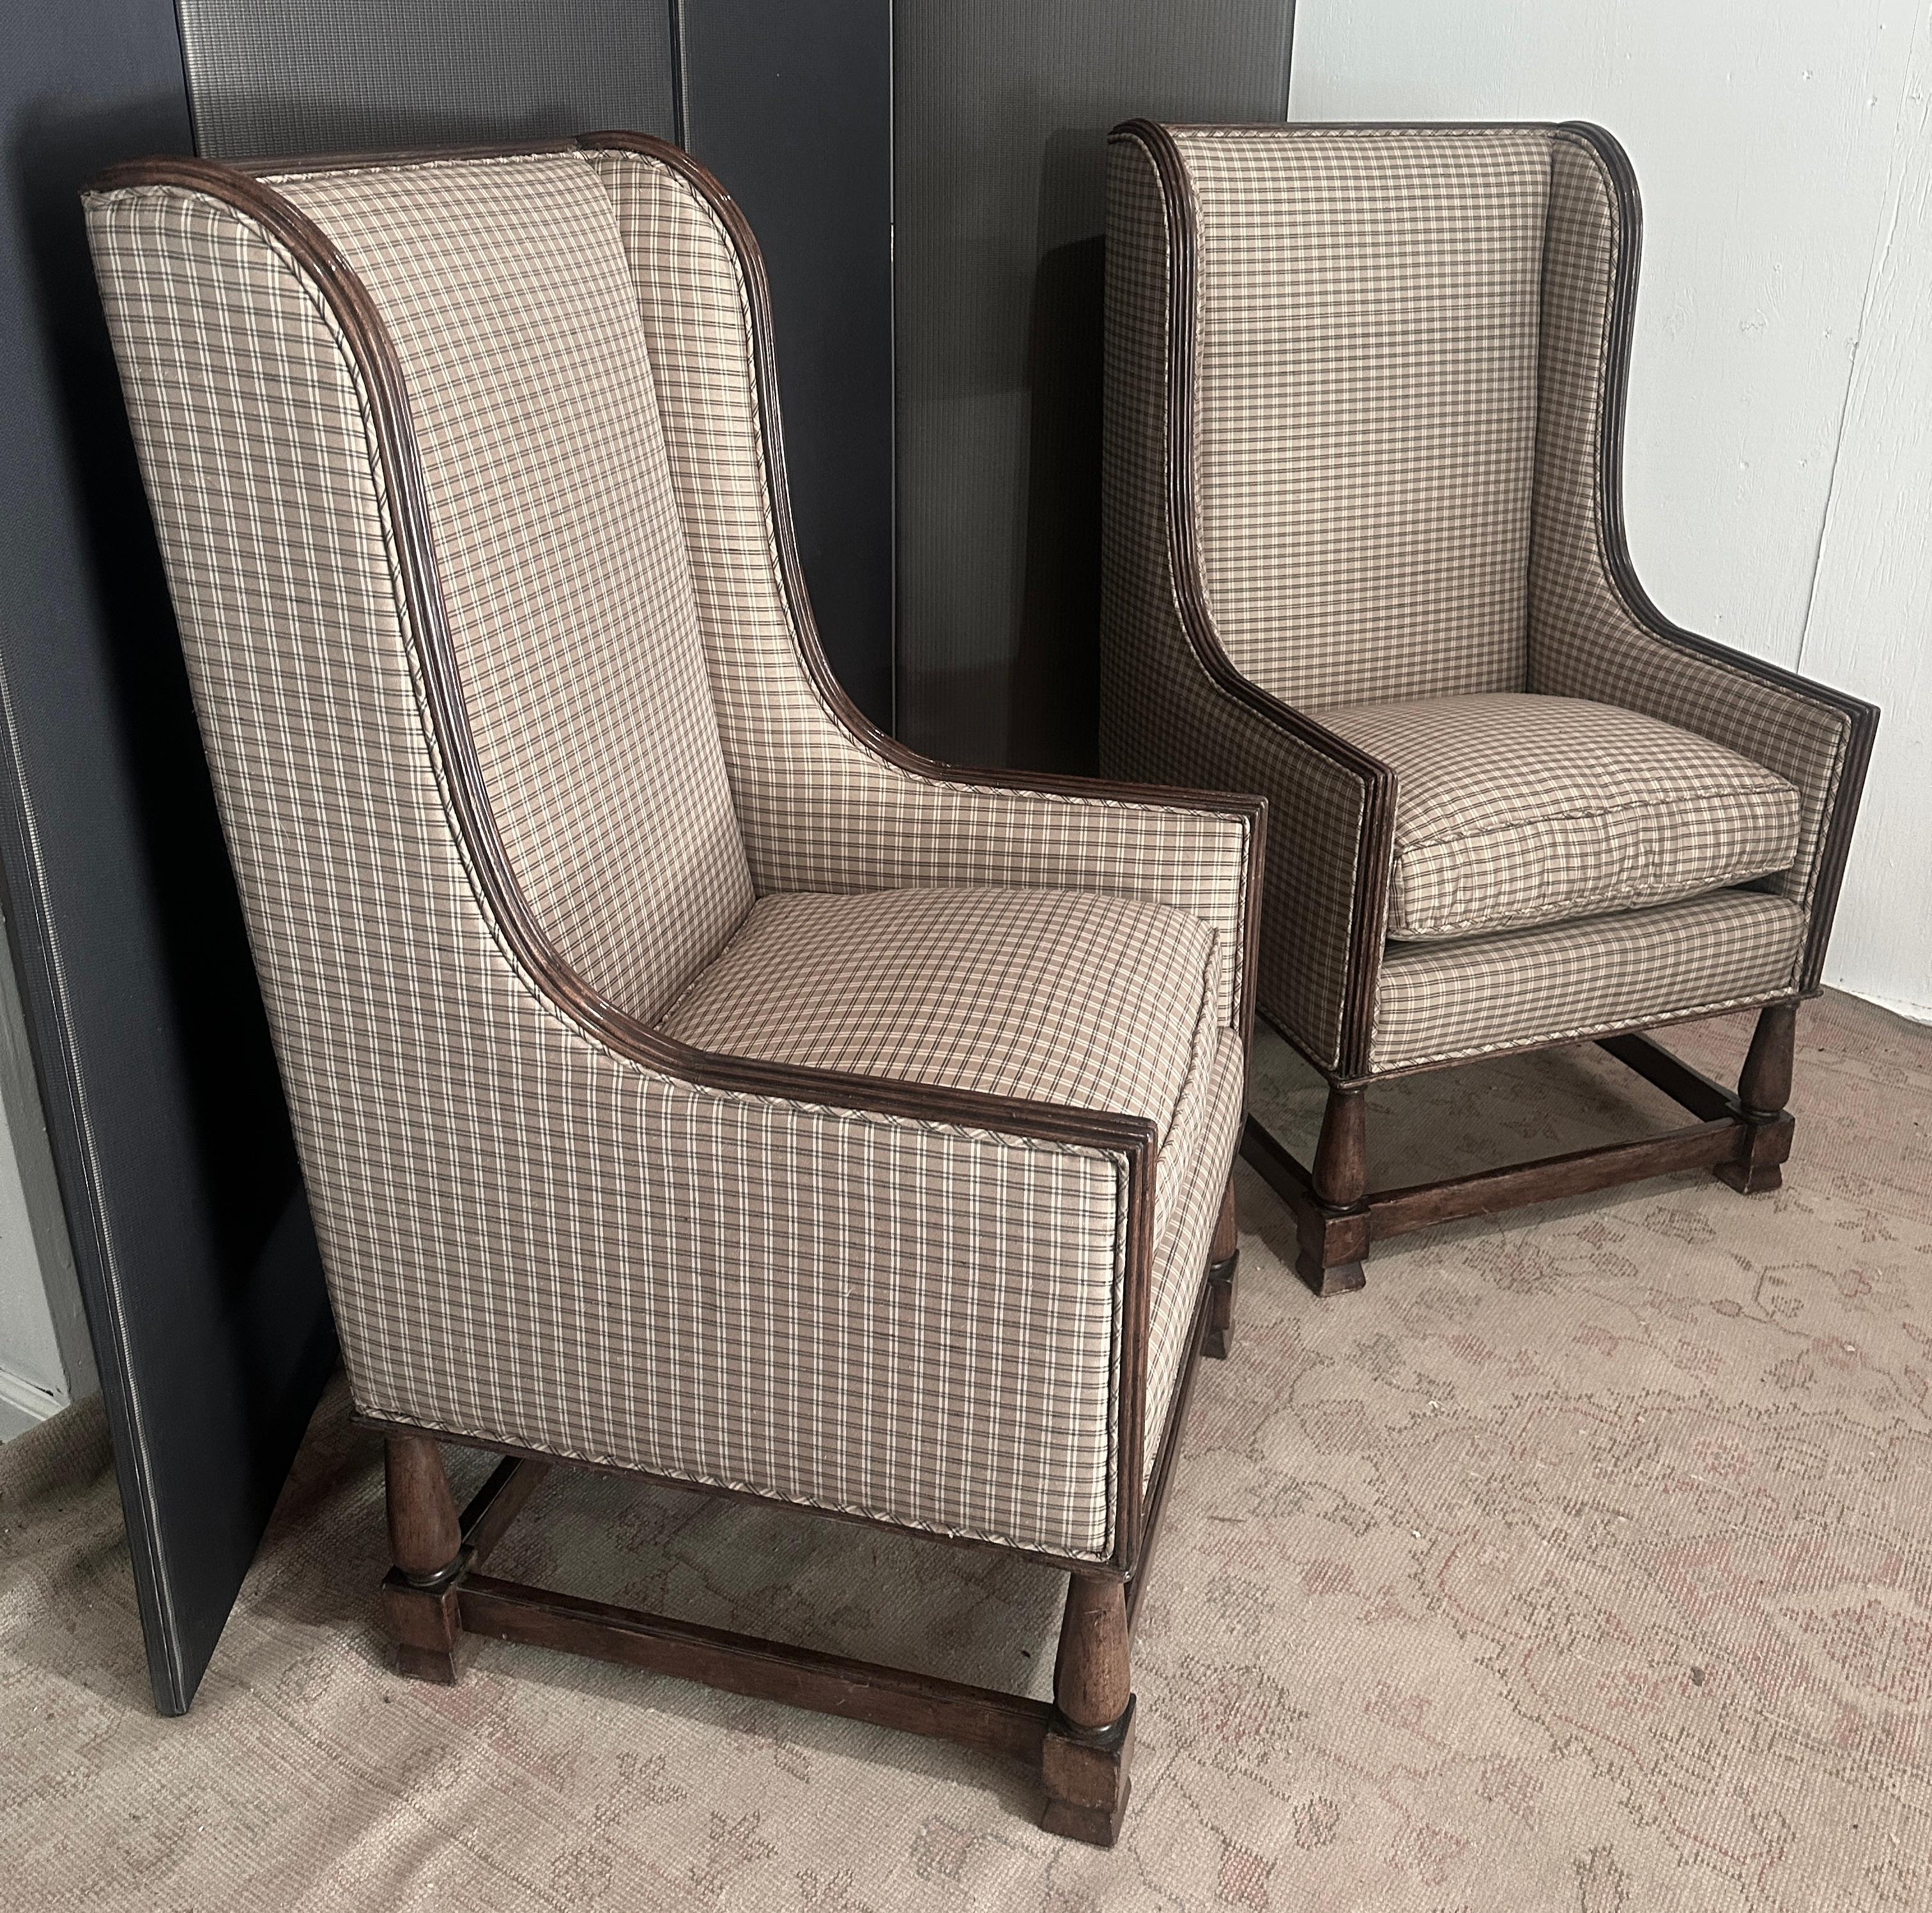 A wonderful pair of wing back chairs, in walnut, hand crafted of the finest
materials, and newly recovered in a classic silk plaid.
The walnut frame is hand carved and very nicely detailed. The upholstery
is well done, the seat cushion down